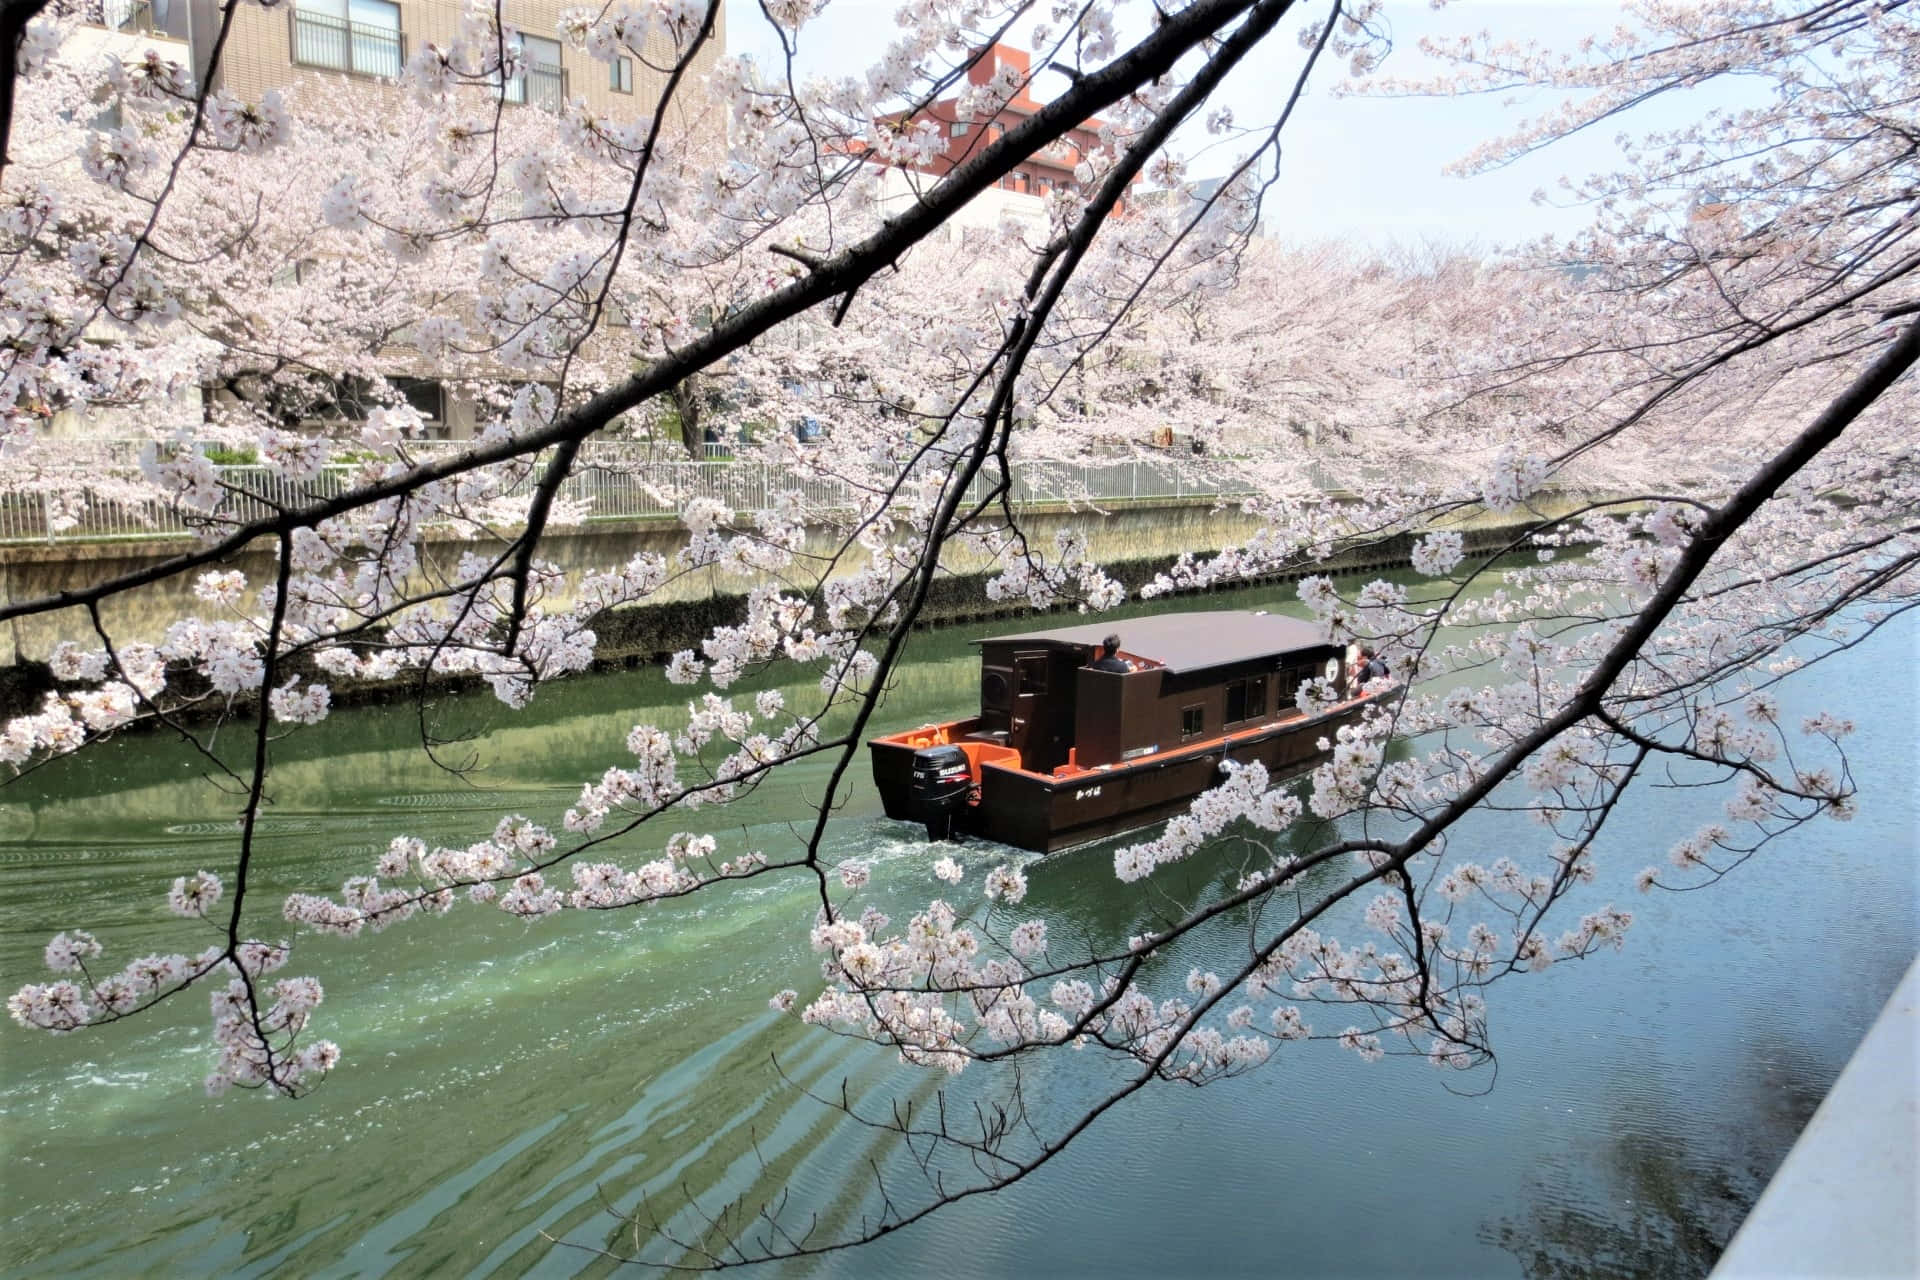 A Boat Is Floating Down A River With Cherry Blossoms